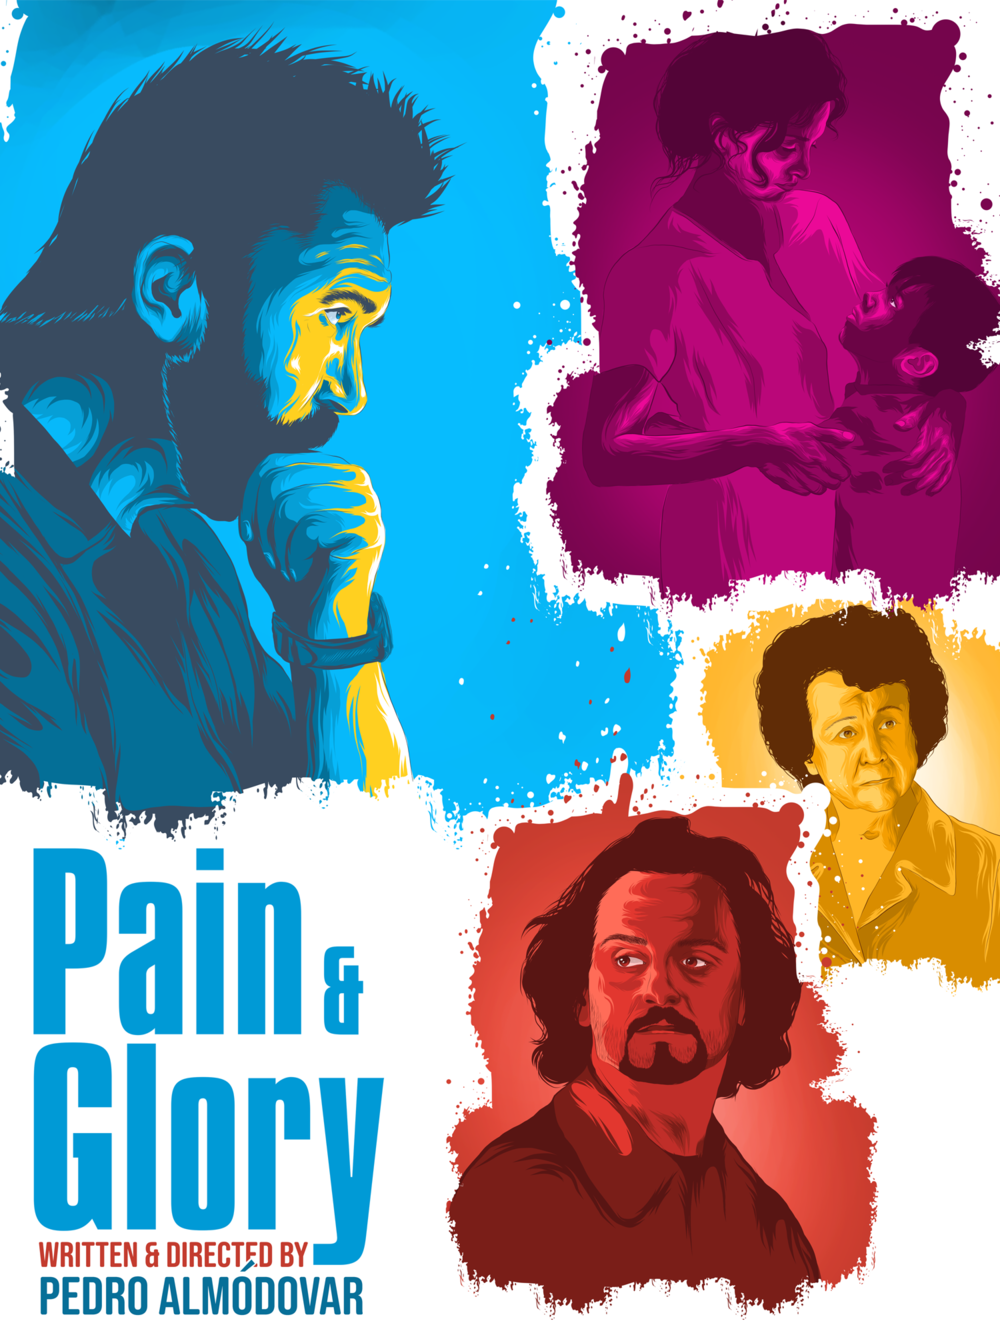 Pain And Glory Wallpapers